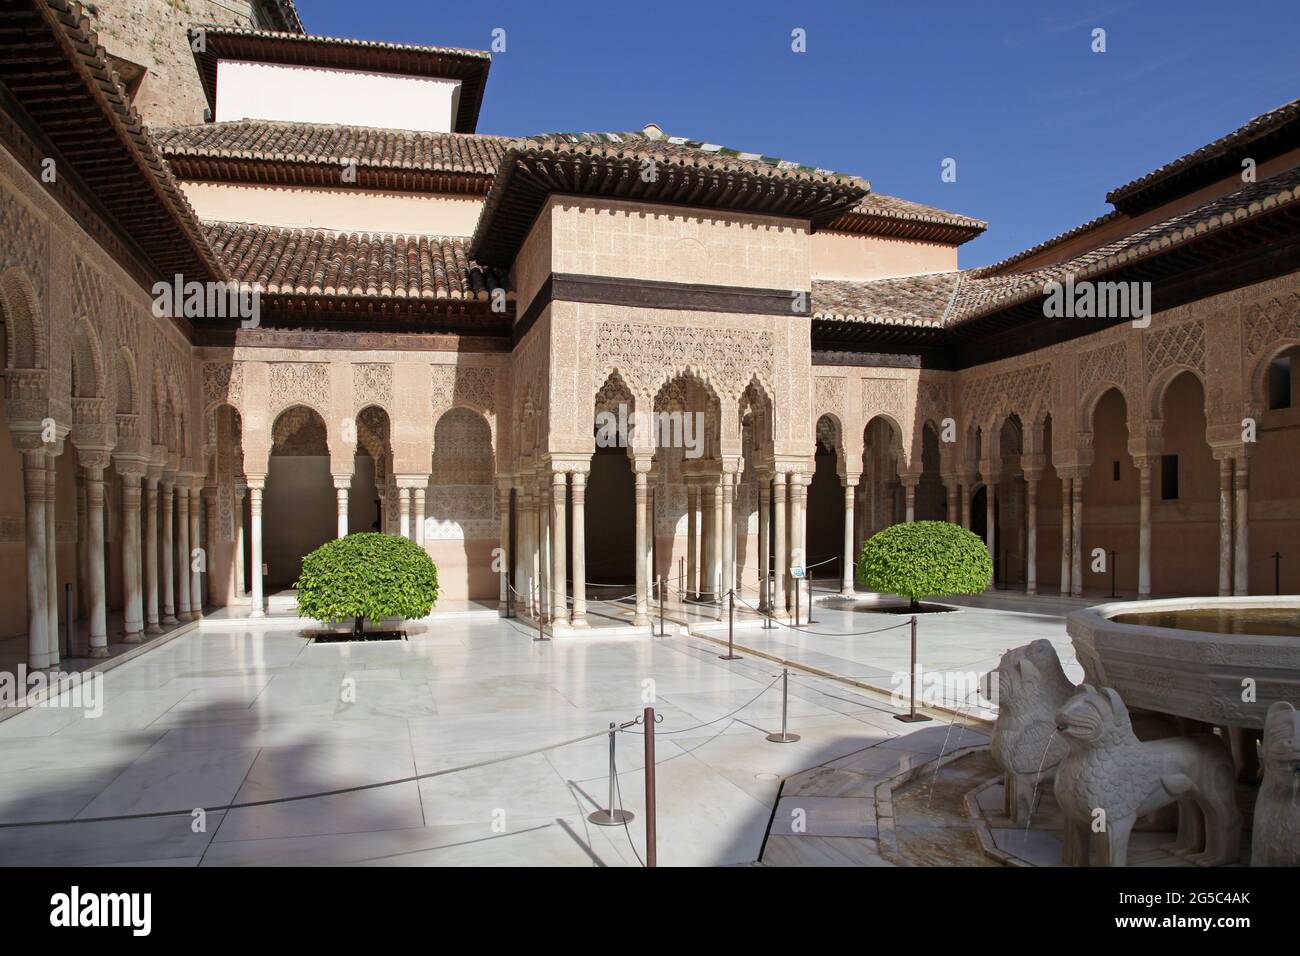 The Patio of the Lions (Patio de los Leones) the most famous place of the Alhambra in Granada.On top of the hill al-Sabika,on the bank of the river Darro,Granada Spain.Constructed as a fortress in 889 CE.,then largely ignored.Rebuilt mid-13th century by Arab Nasrid emir Mohammed ben Al-Ahmar of the Emirate of Granada,After the Christian Reconquista in 1492,the site became the Royal Court of Ferdinand and Isabella. Stock Photo